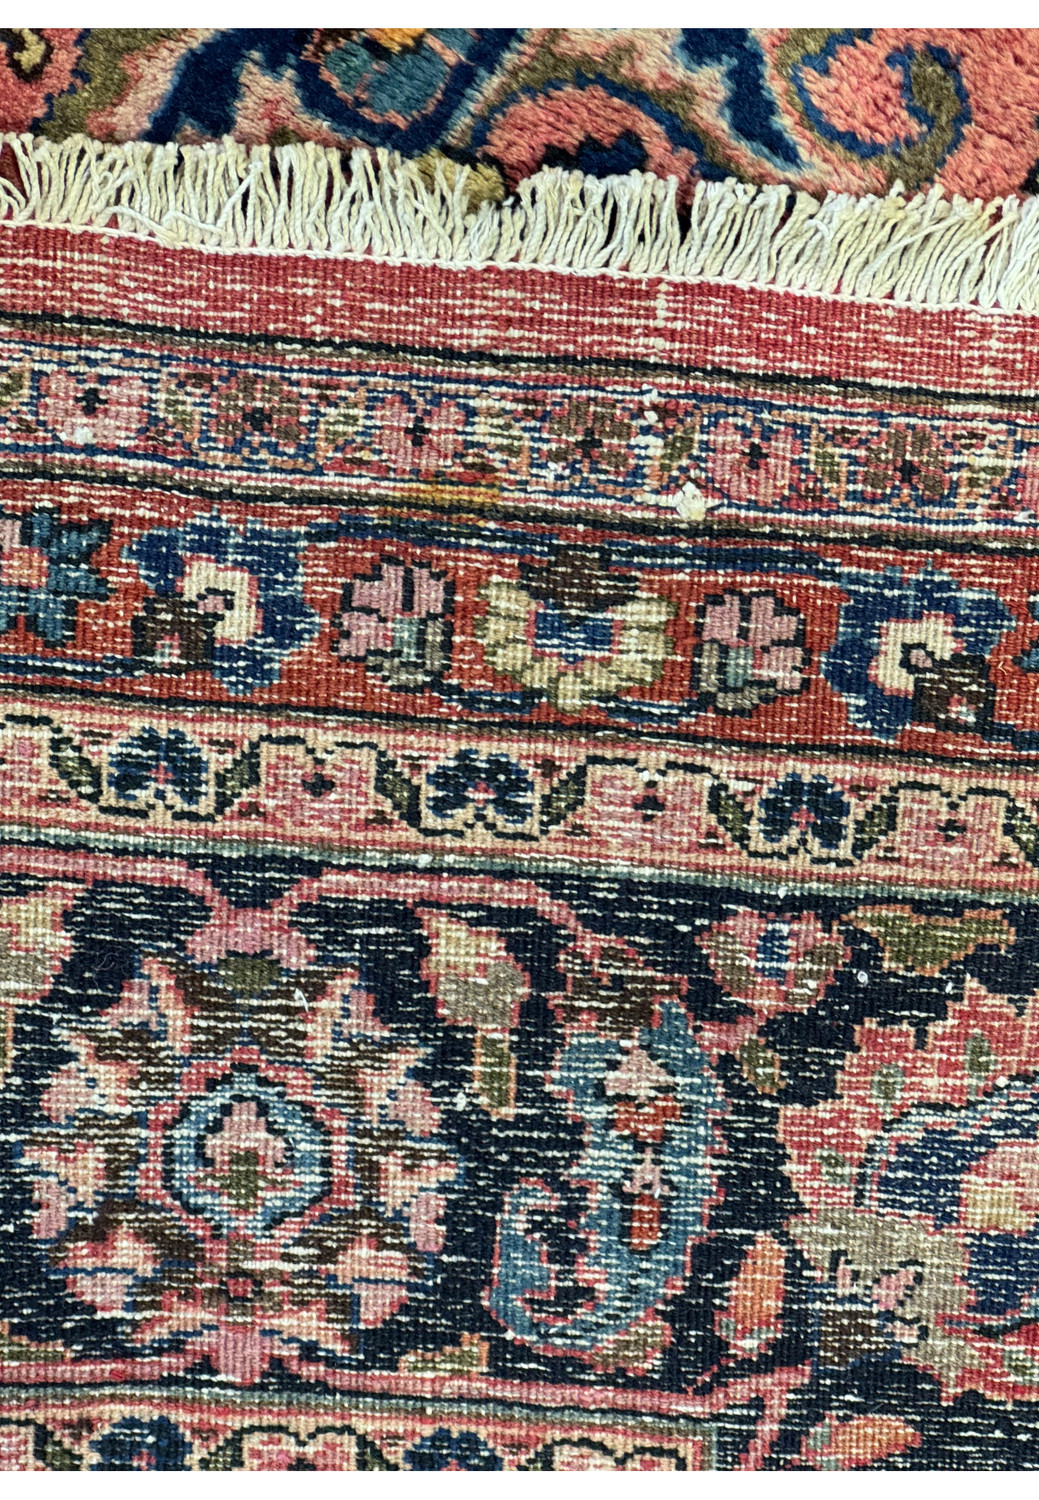 Detailed image of the fringe and border of a Persian Mashad rug. The image displays the fine white fringe, which transitions into the intricate border pattern featuring geometric and floral motifs in a rich array of colors such as deep blue, red, and pink on a dark navy background